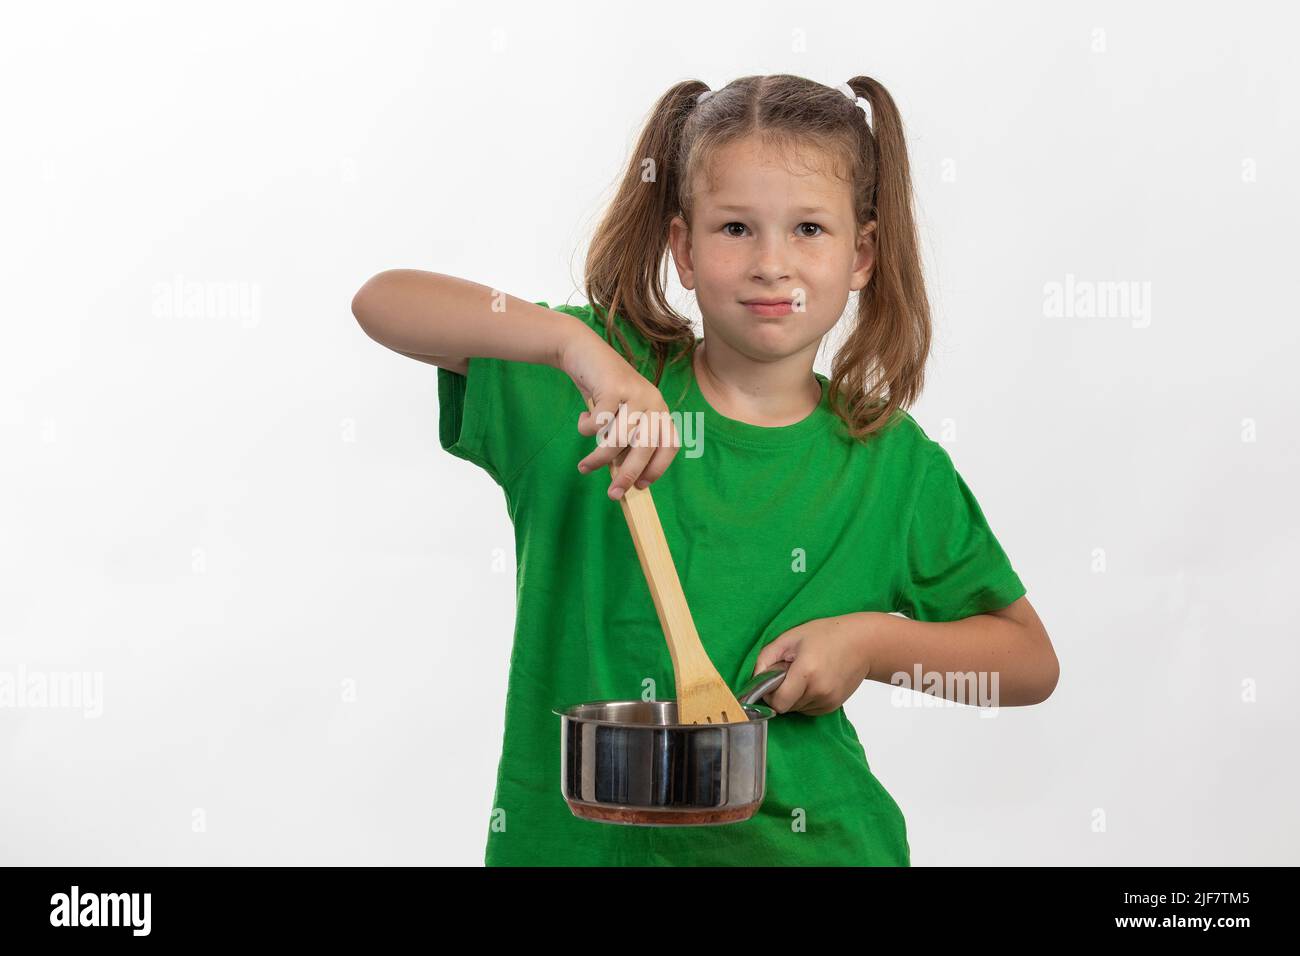 A young girl shows that she loves to cook with her wooden cooking spoon and stainless steel pot Stock Photo